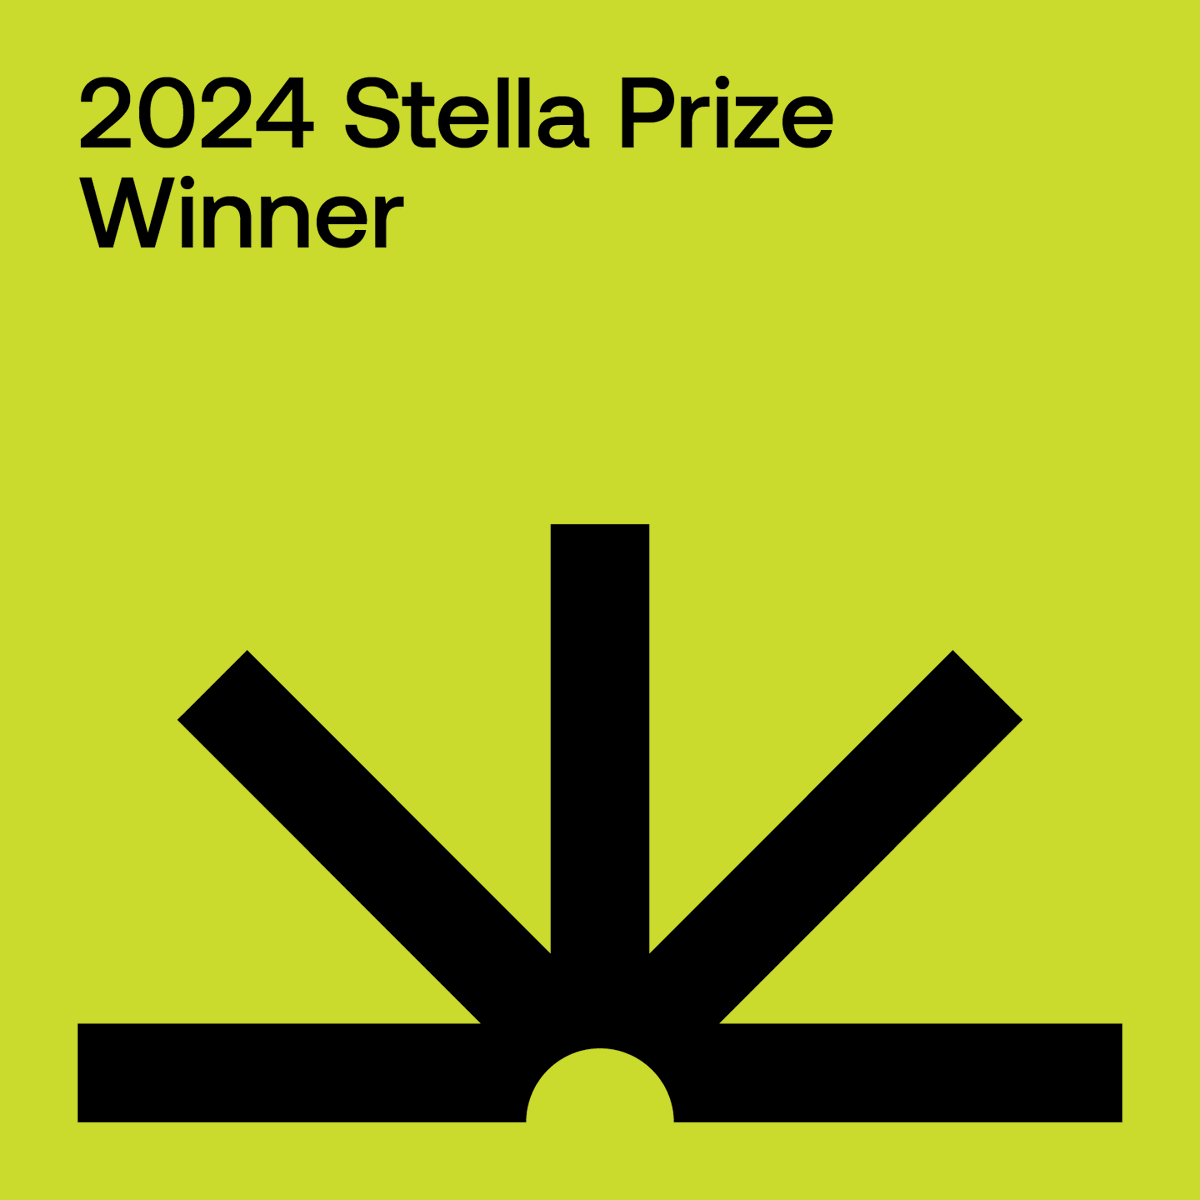 The #2024stellaprize winner will be announced tomorrow night at 7:30pm (AEST)!

Tune in LIVE: youtube.com/watch?v=OIENG7…